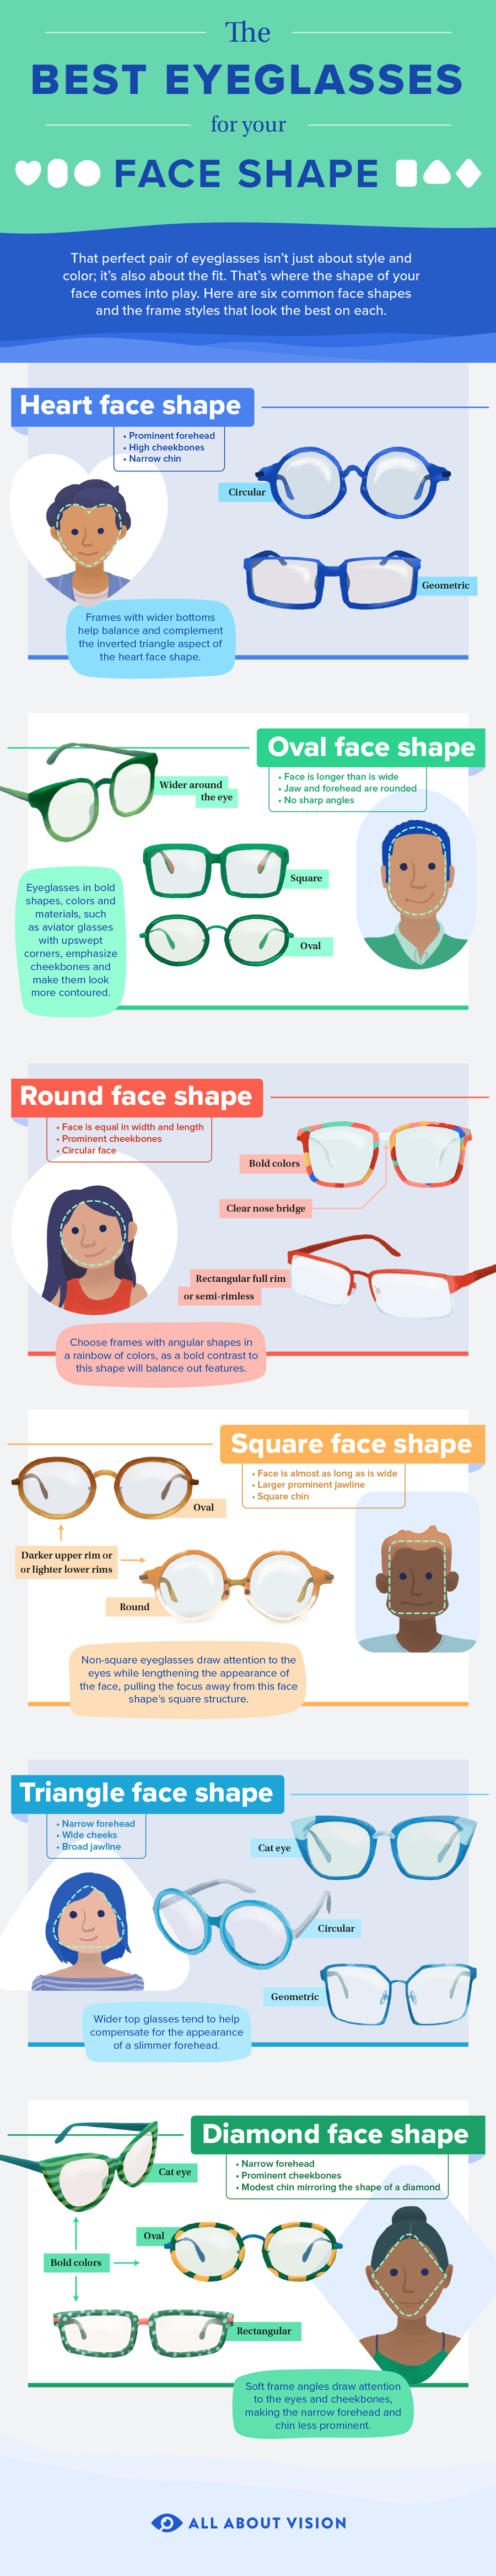 Best frames for my face shape: Infographic